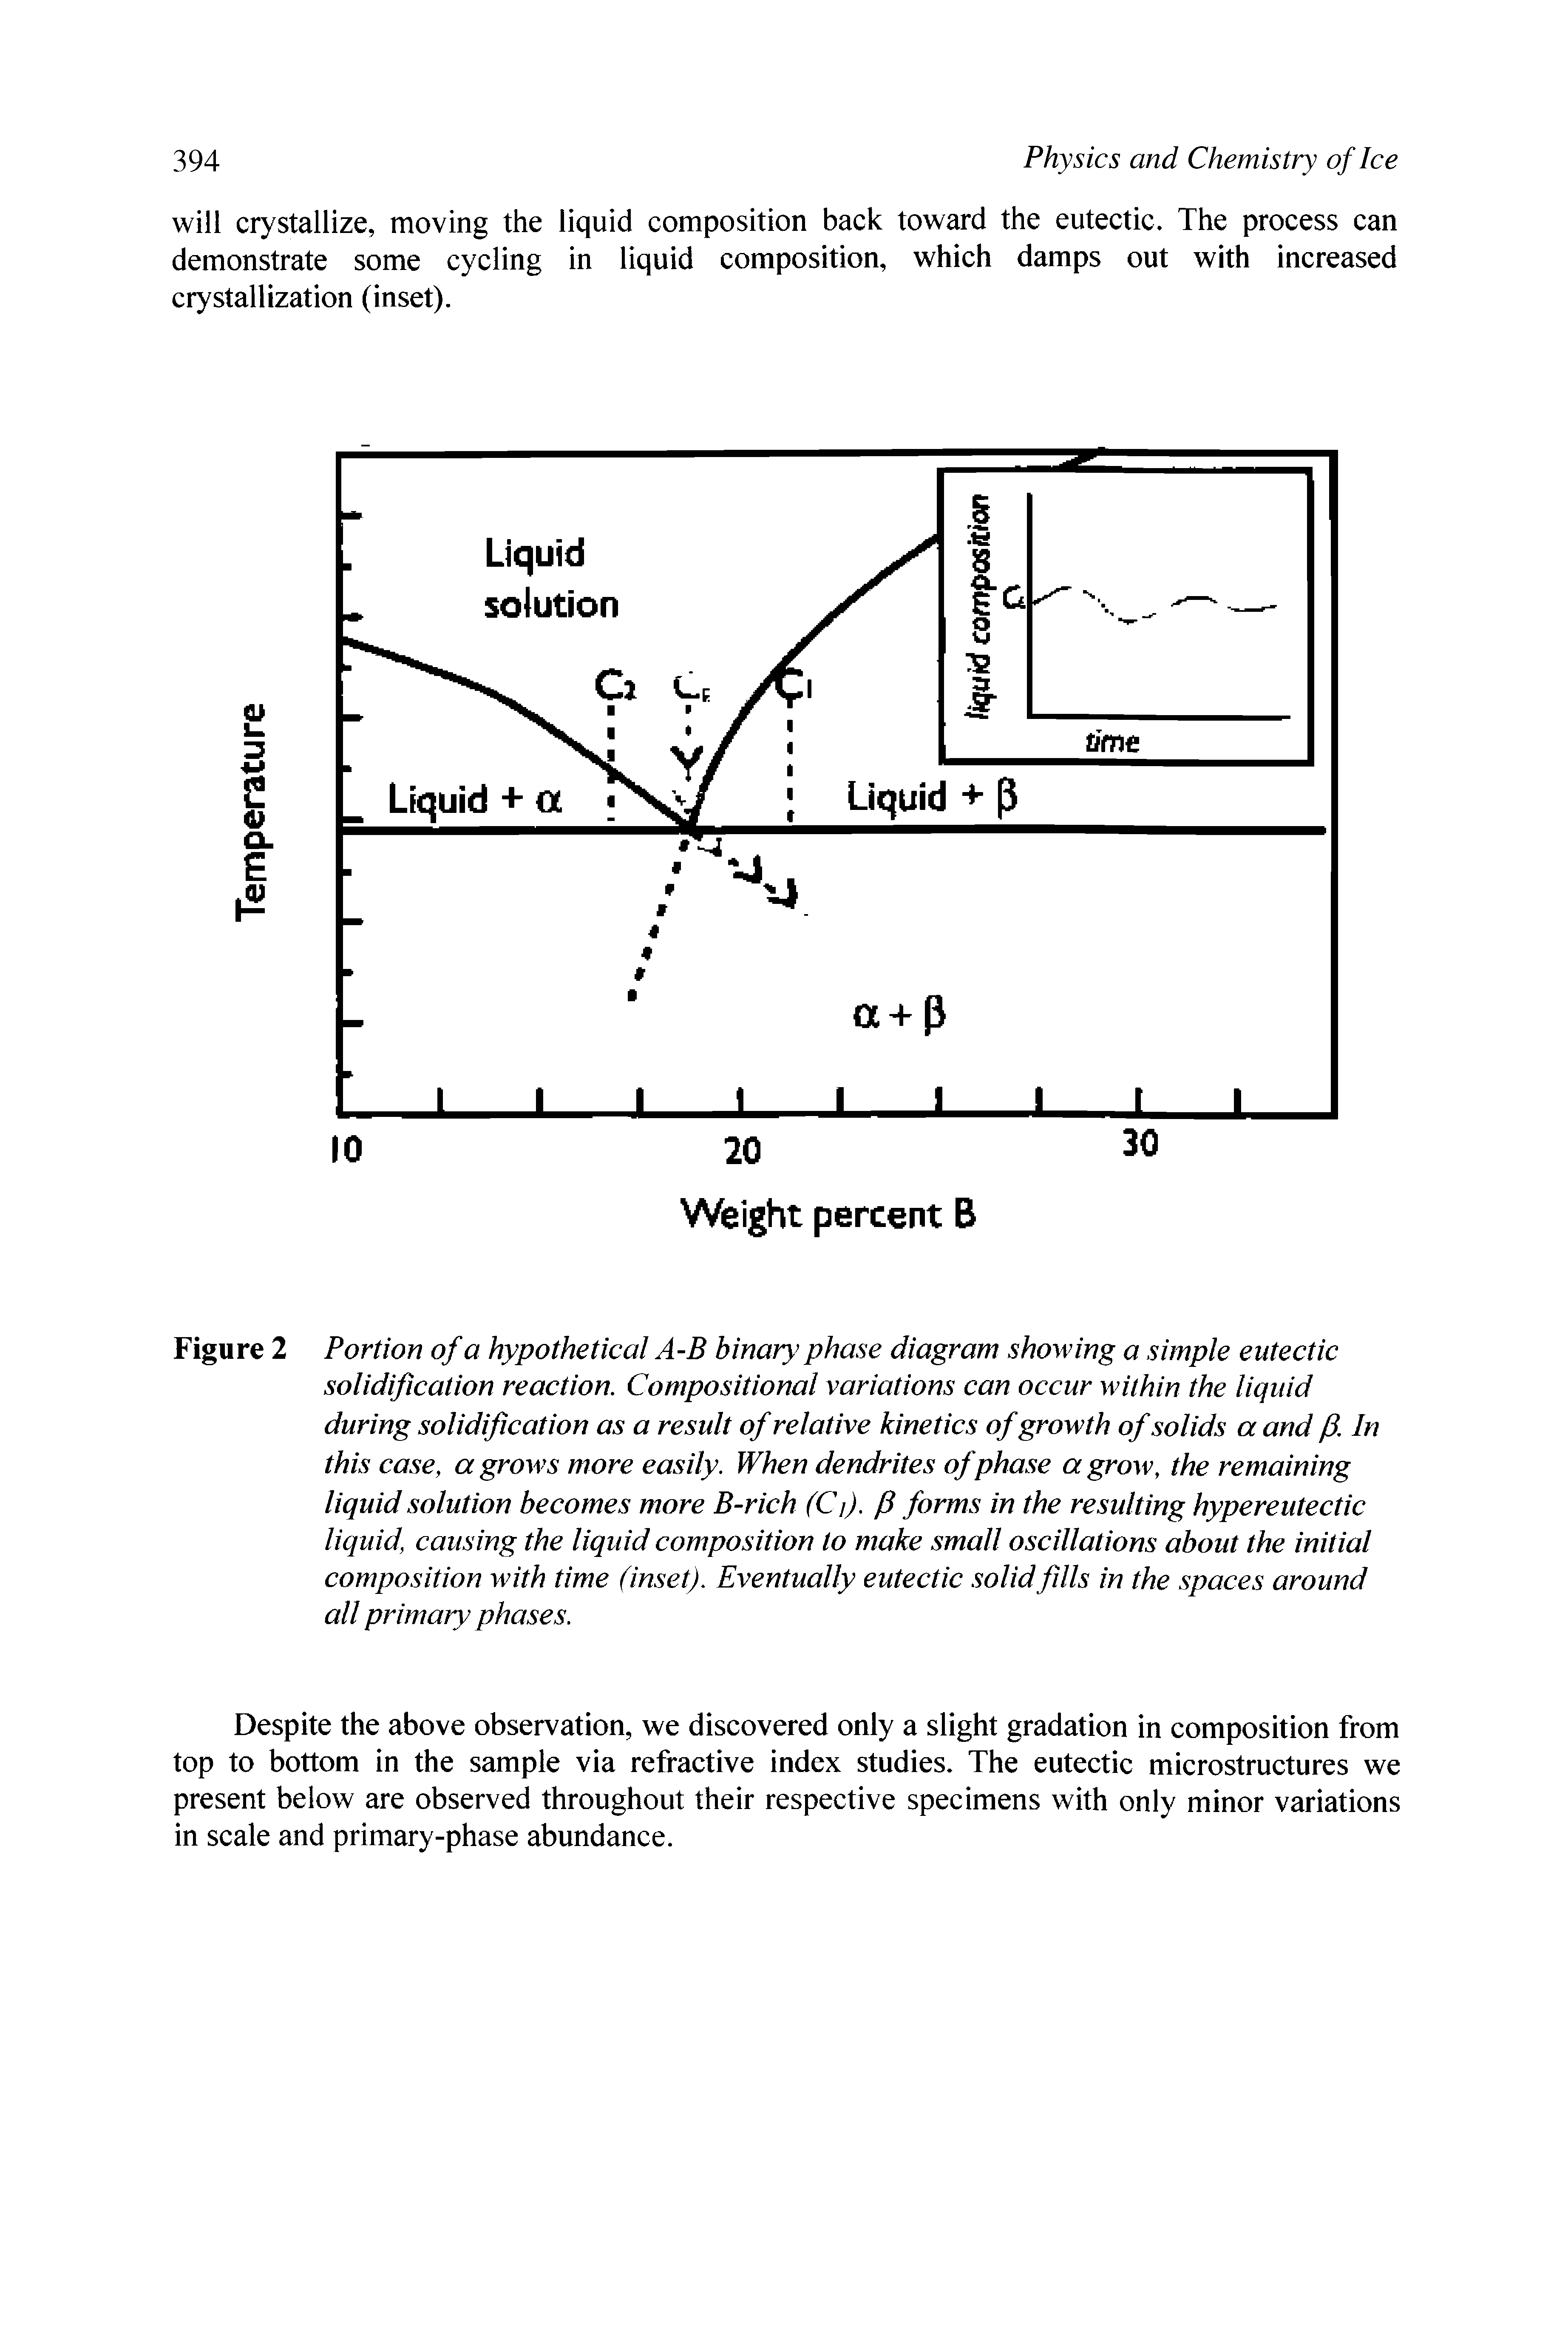 Figure 2 Portion of a hypothetical A-B binary phase diagram showing a simple eutectic solidification reaction. Compositional variations can occur within the liquid during solidification as a result of relative kinetics of growth of solids a and f. In this case, a grows more easily. When dendrites of phase a grow, the remaining liquid solution becomes more B-rich (Ci). f forms in the resulting hypereutectic liquid, causing the liqidd composition to make small oscillations about the initial composition with time (inset). Eventually eutectic solid fills in the spaces around all primary phases.